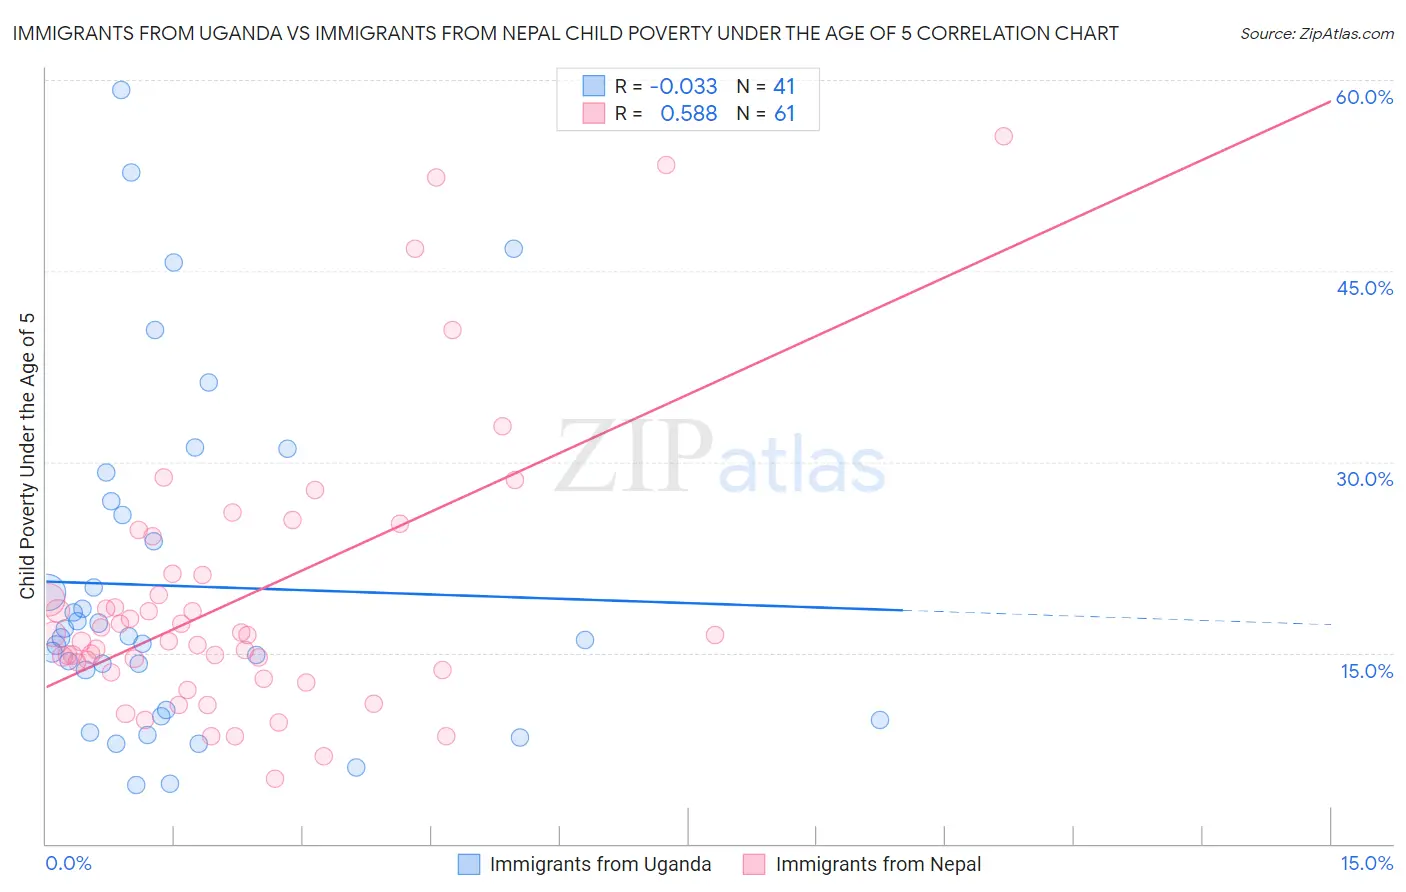 Immigrants from Uganda vs Immigrants from Nepal Child Poverty Under the Age of 5